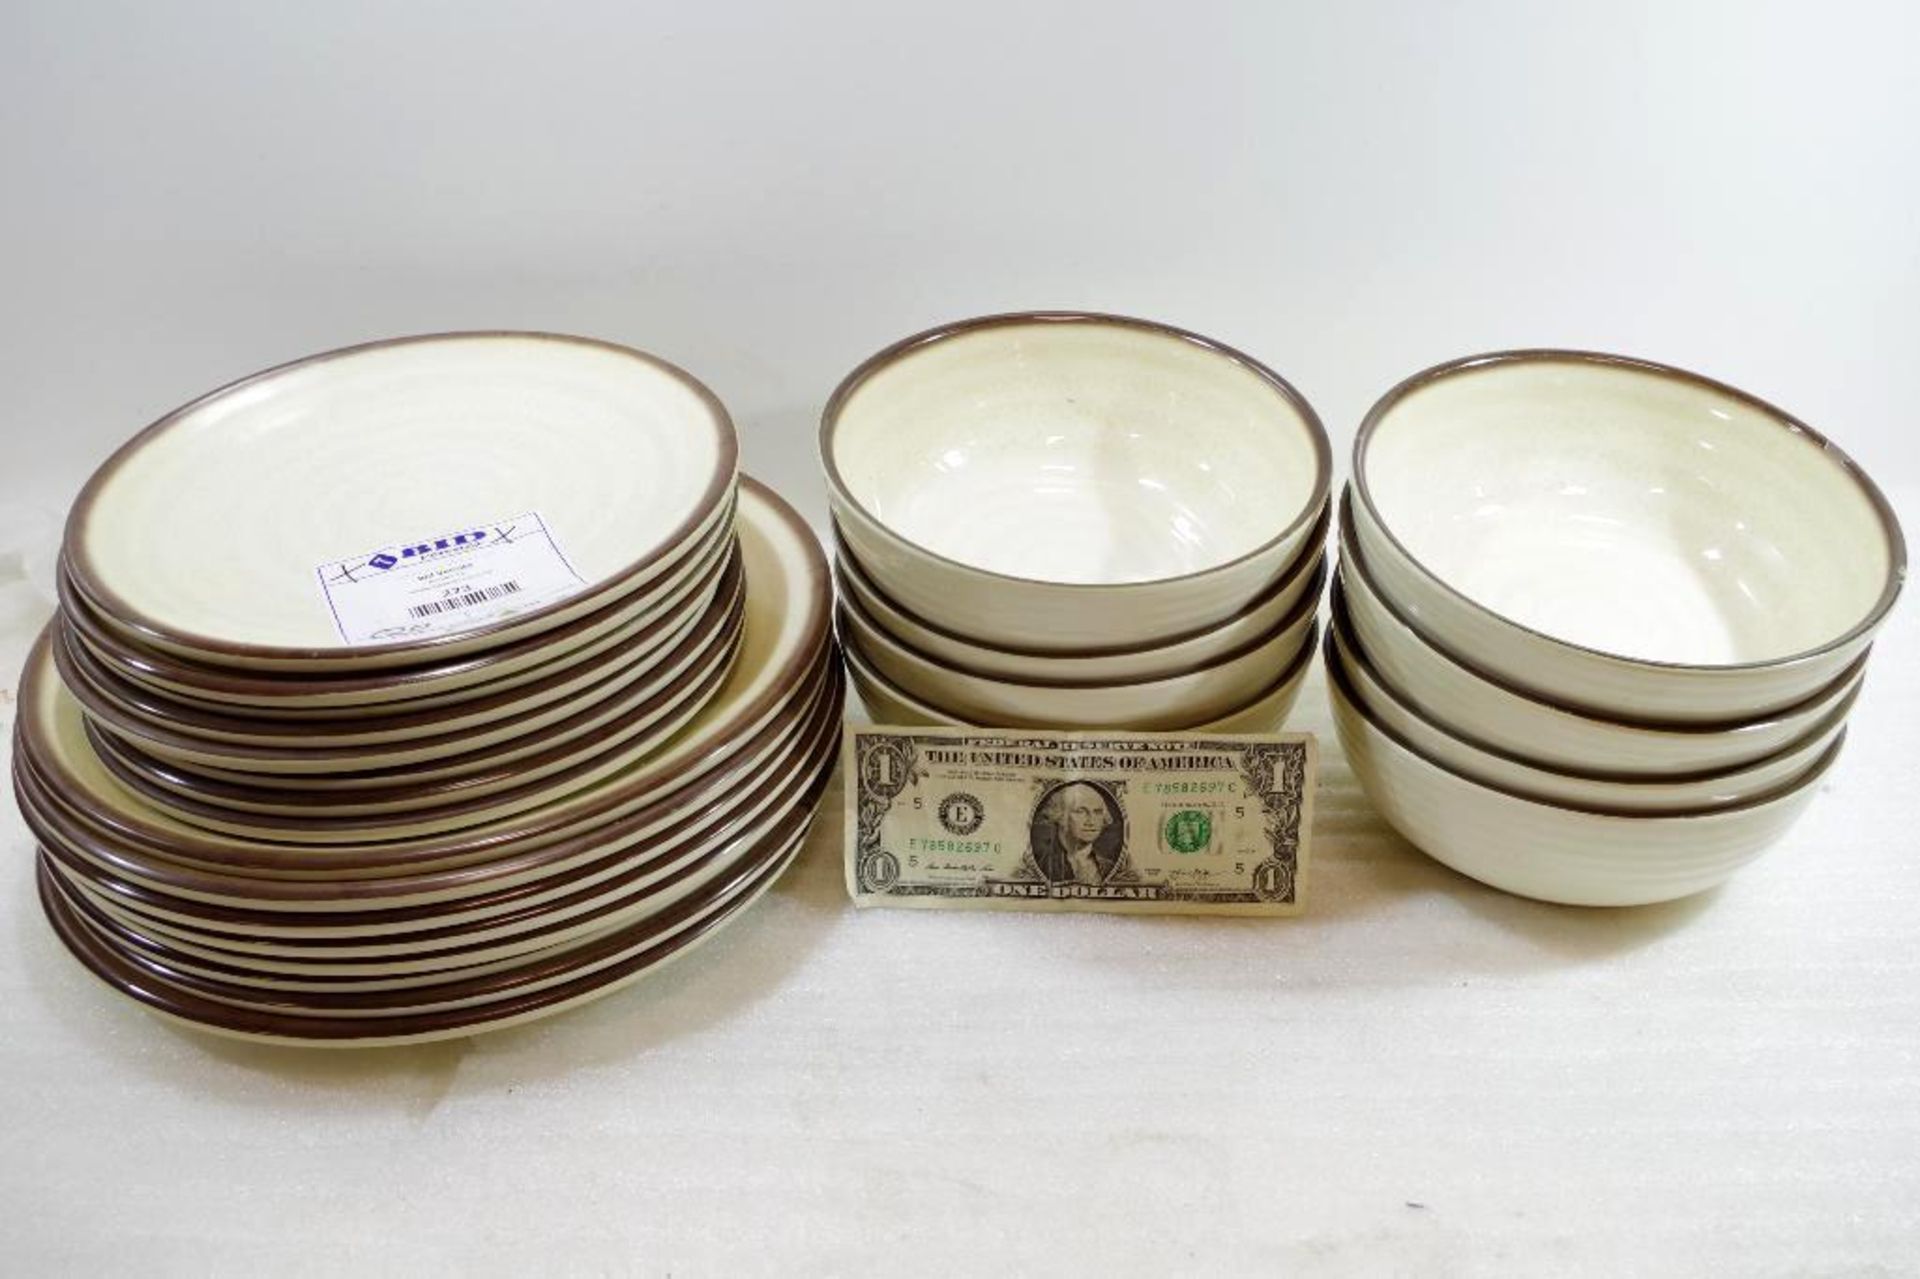 8-Piece Melamine Dinnerware Set (Store Return, One or More Chipped) - Image 3 of 3